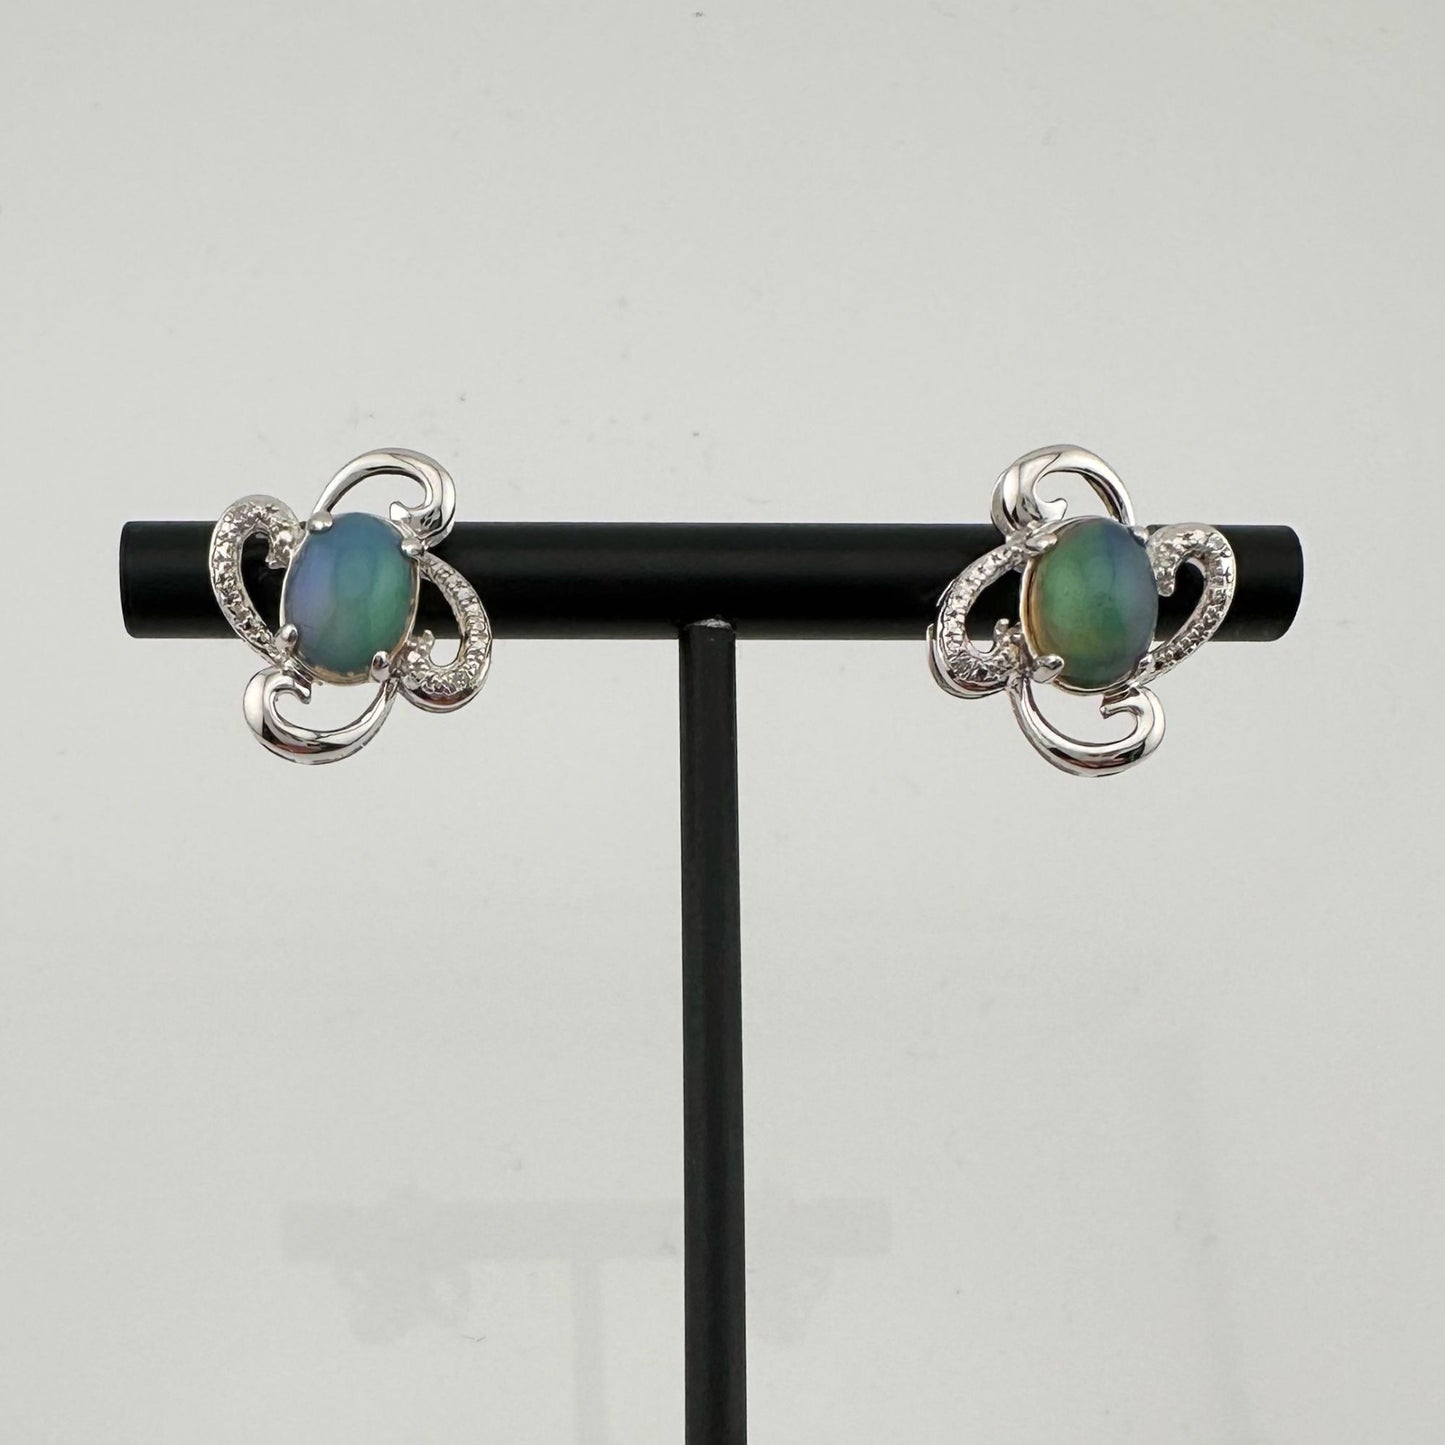 Mesmerizing Natural Cabochon Black Opal Earrings Diamond Accent - Sterling Silver